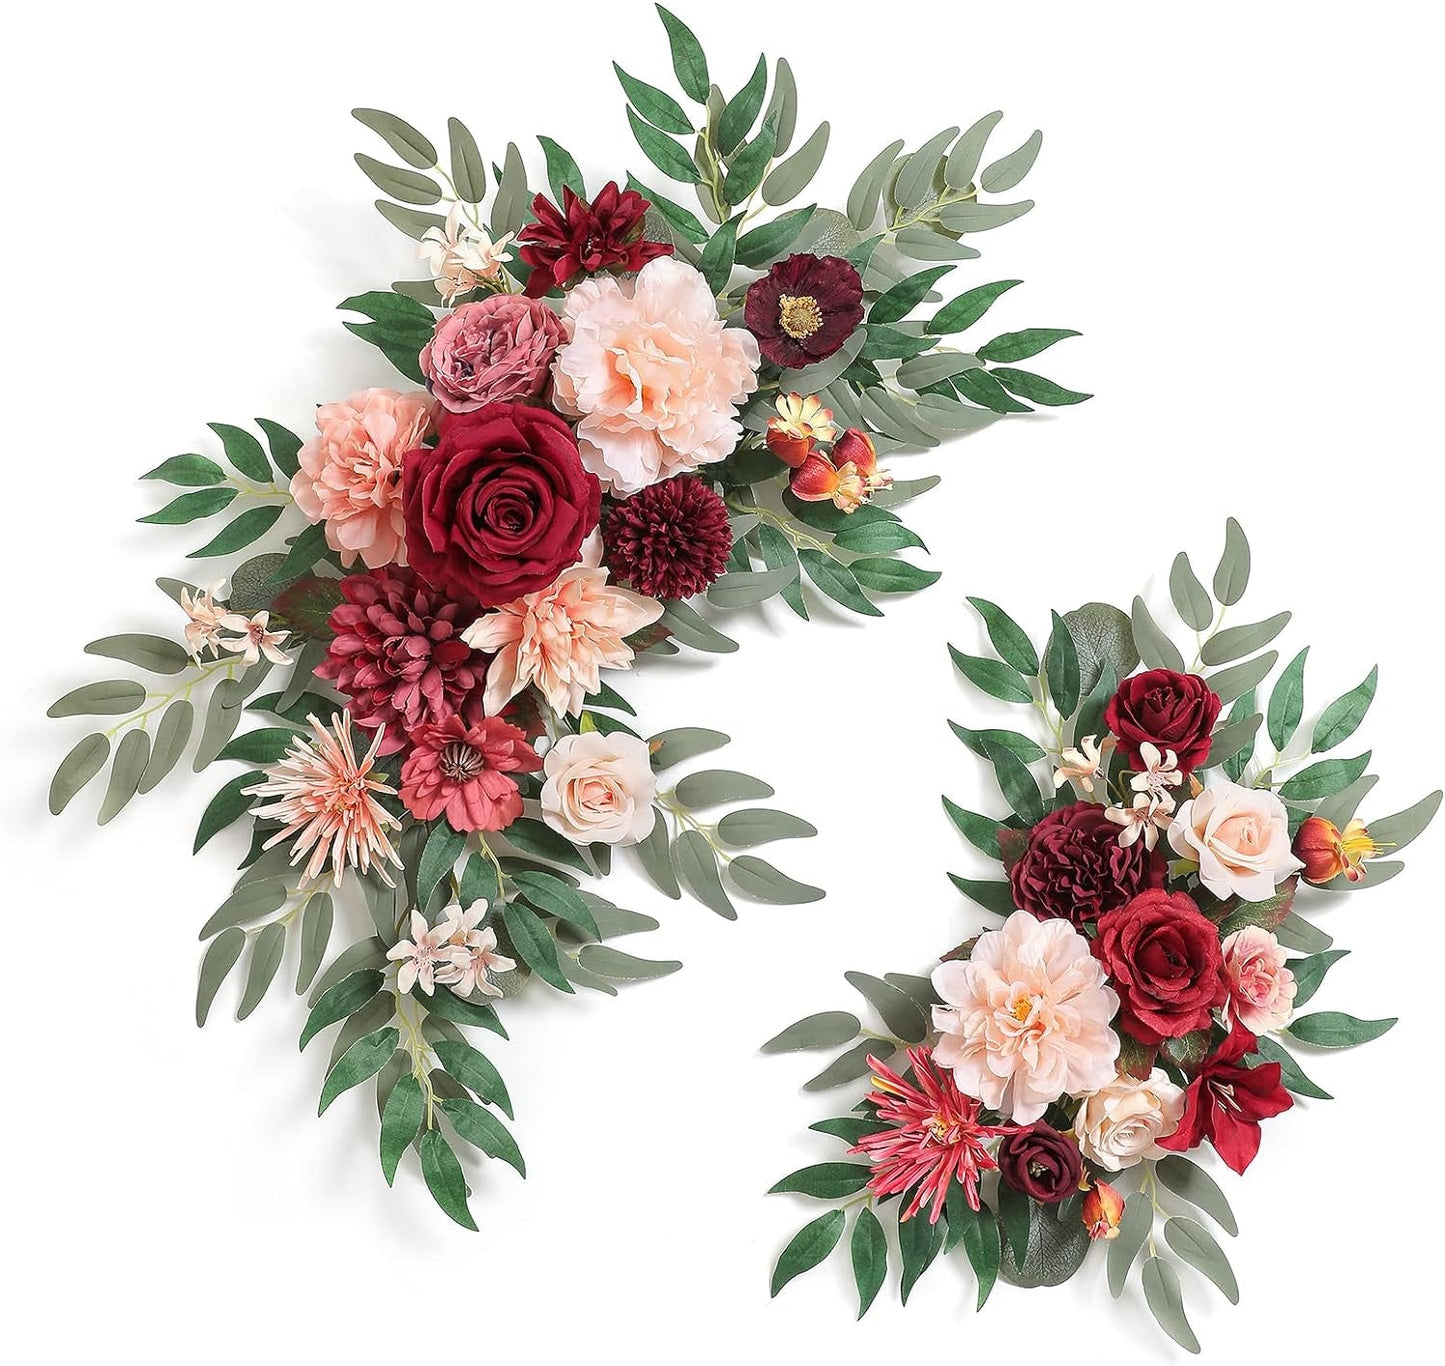 Serra Flora Artificial Flower Swag Wedding Arch Flowers Kit (Pack of 2) for DIY Burgundy Rose Arrangements Party Welcome Ceremony Sign and Reception Backdrop Floral Decoration